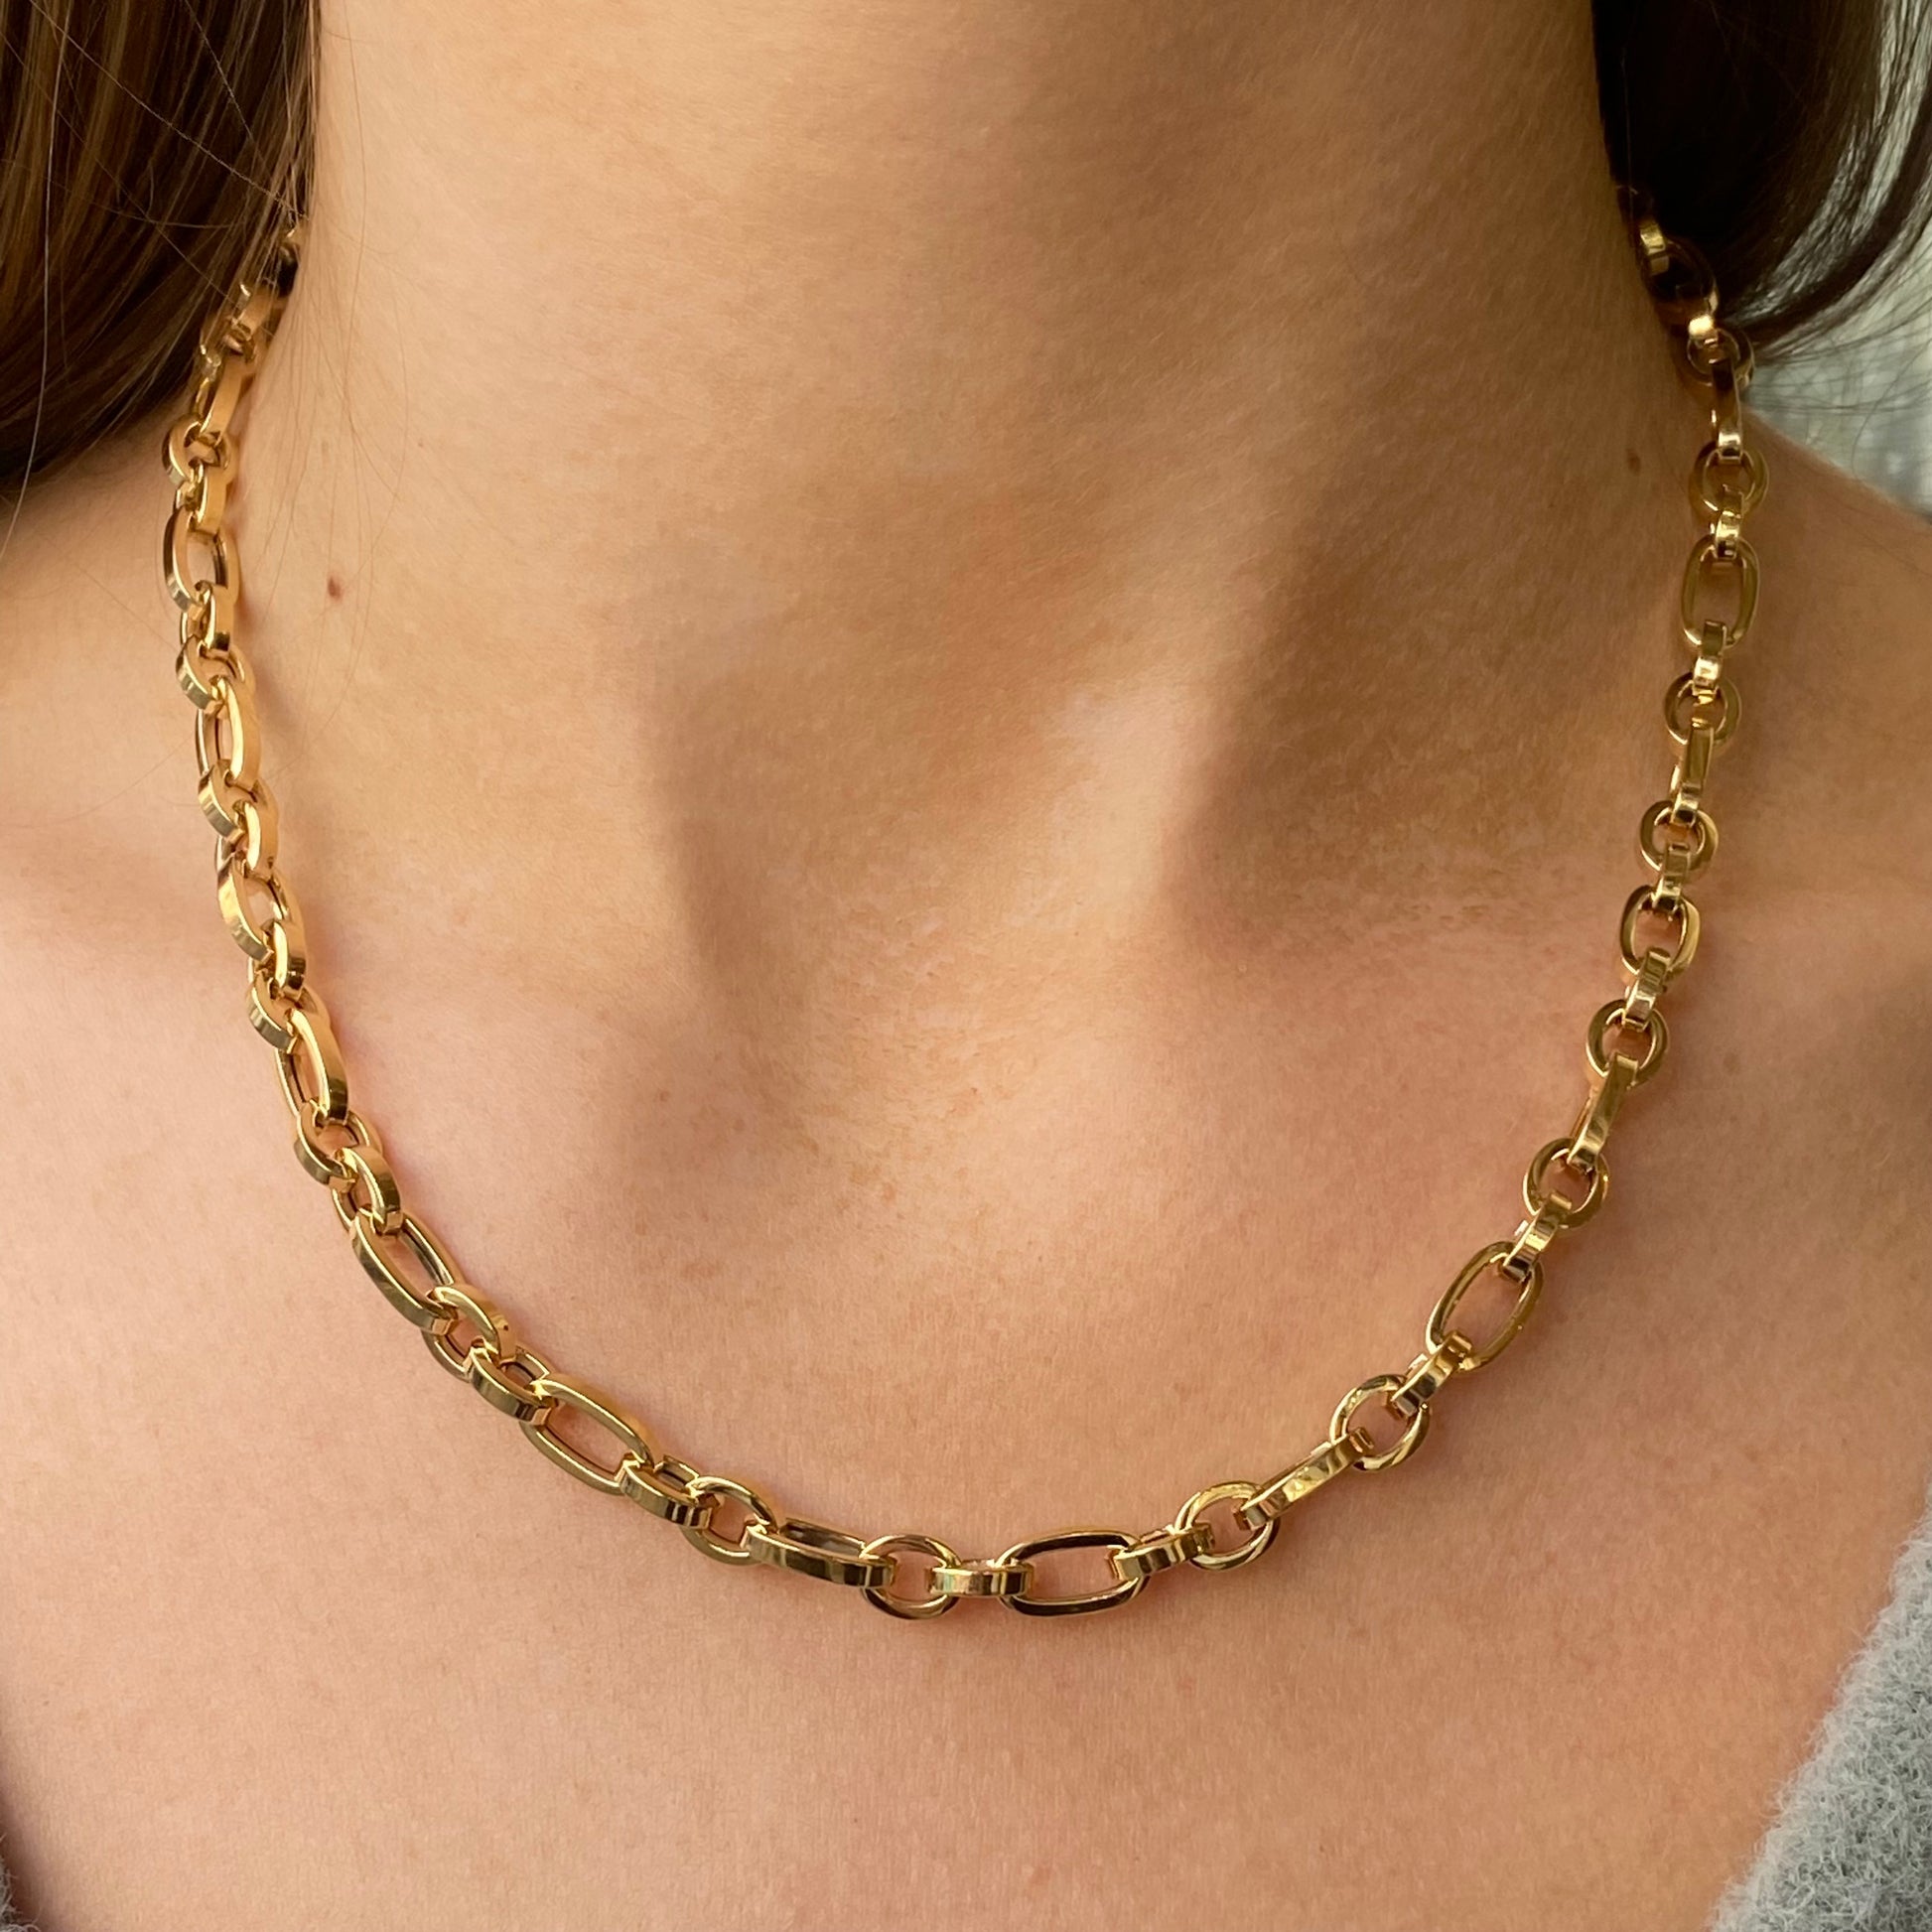 9ct Gold Chunky Link Necklace - John Ross Jewellers